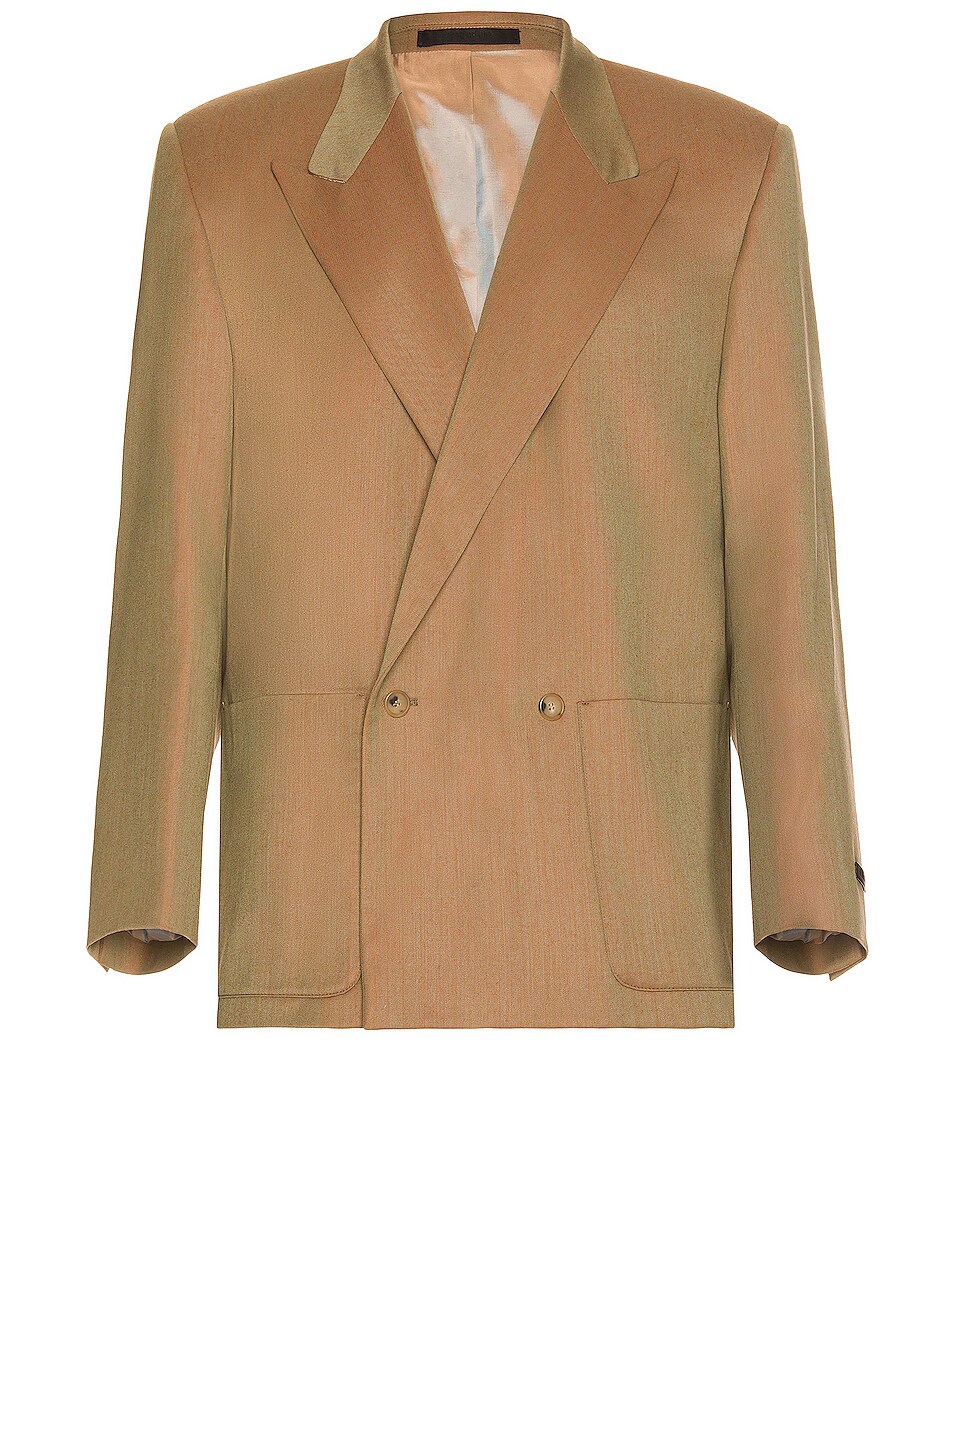 Image 1 of Fear of God The Suit Jacket in Iridescent Beige